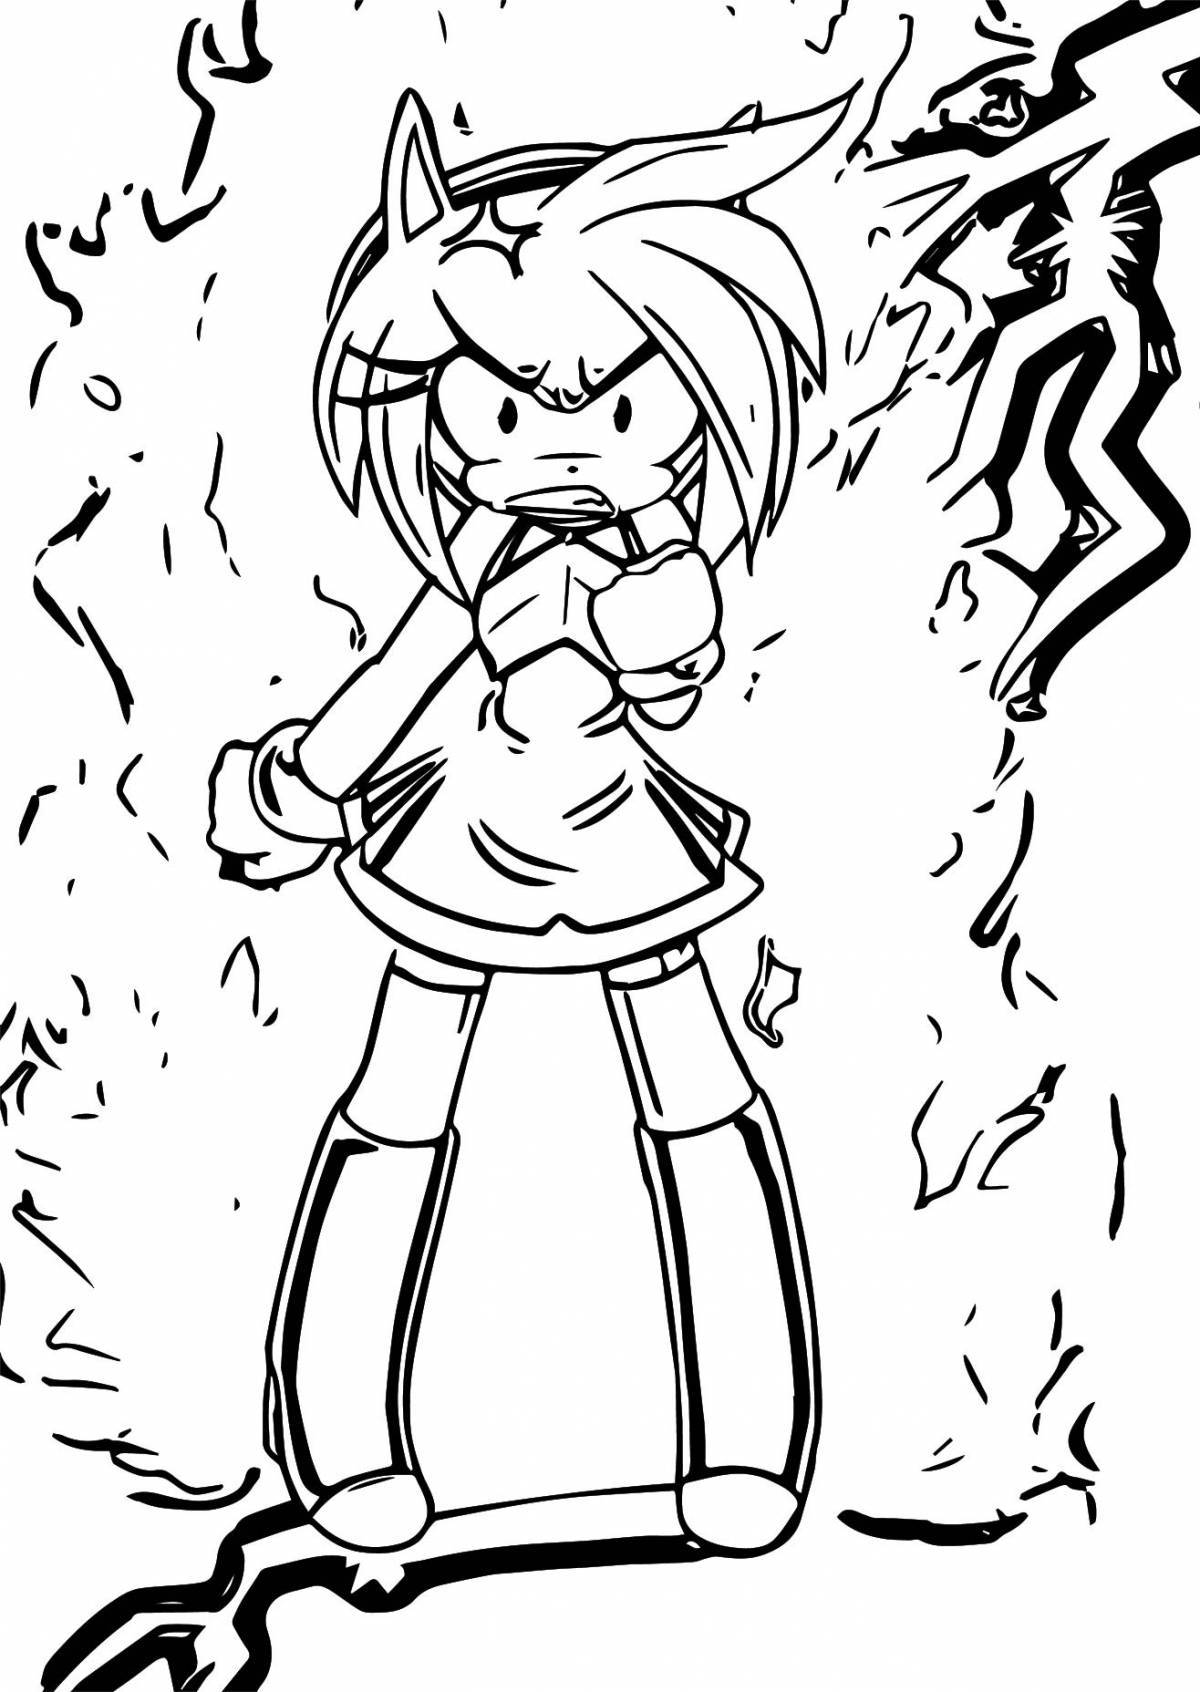 Exciting amy rose coloring page